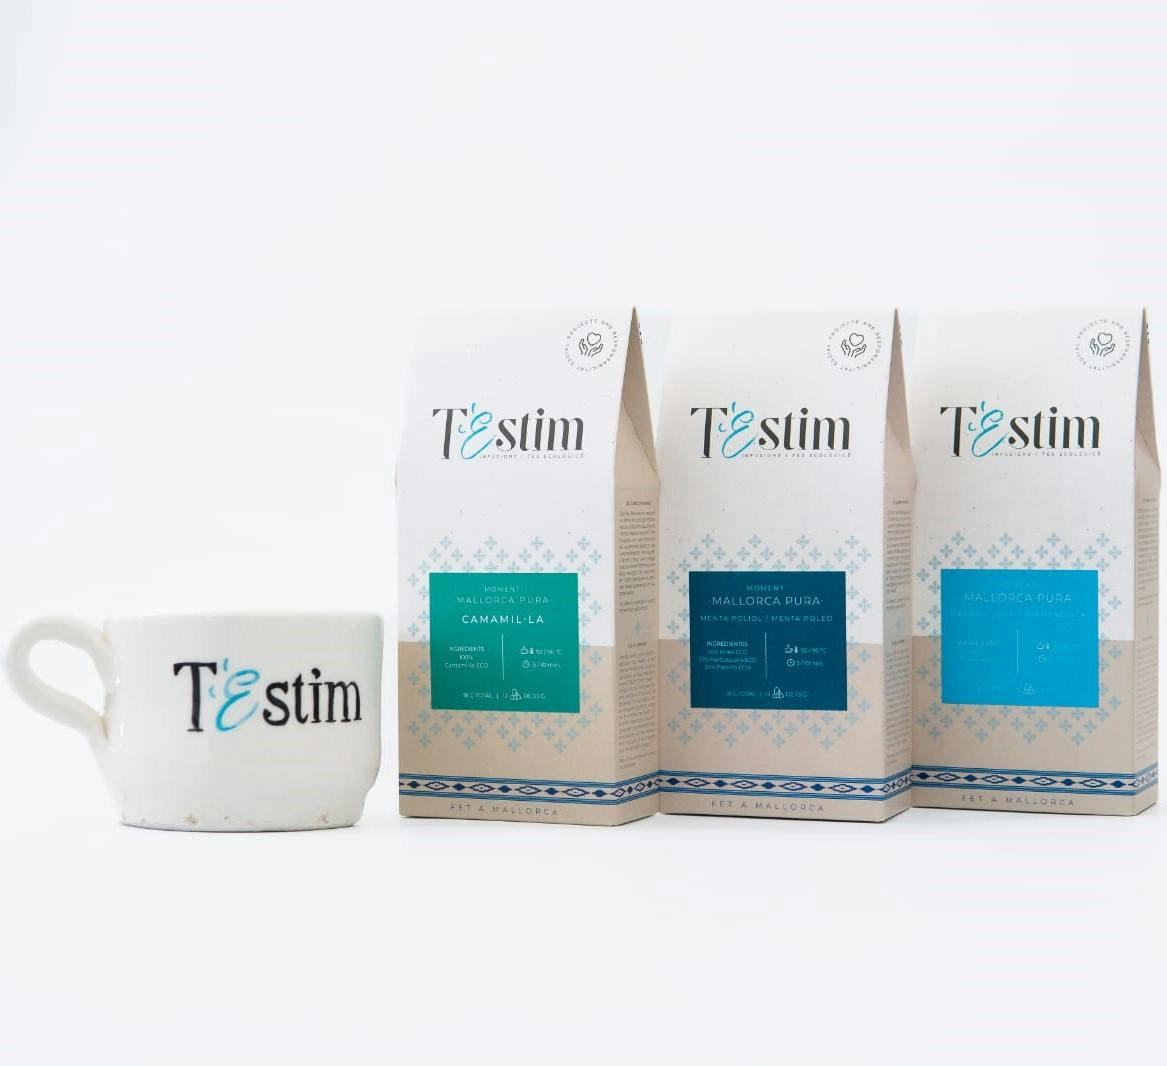 4 T'Estim products - 3 infusions and 1 cup